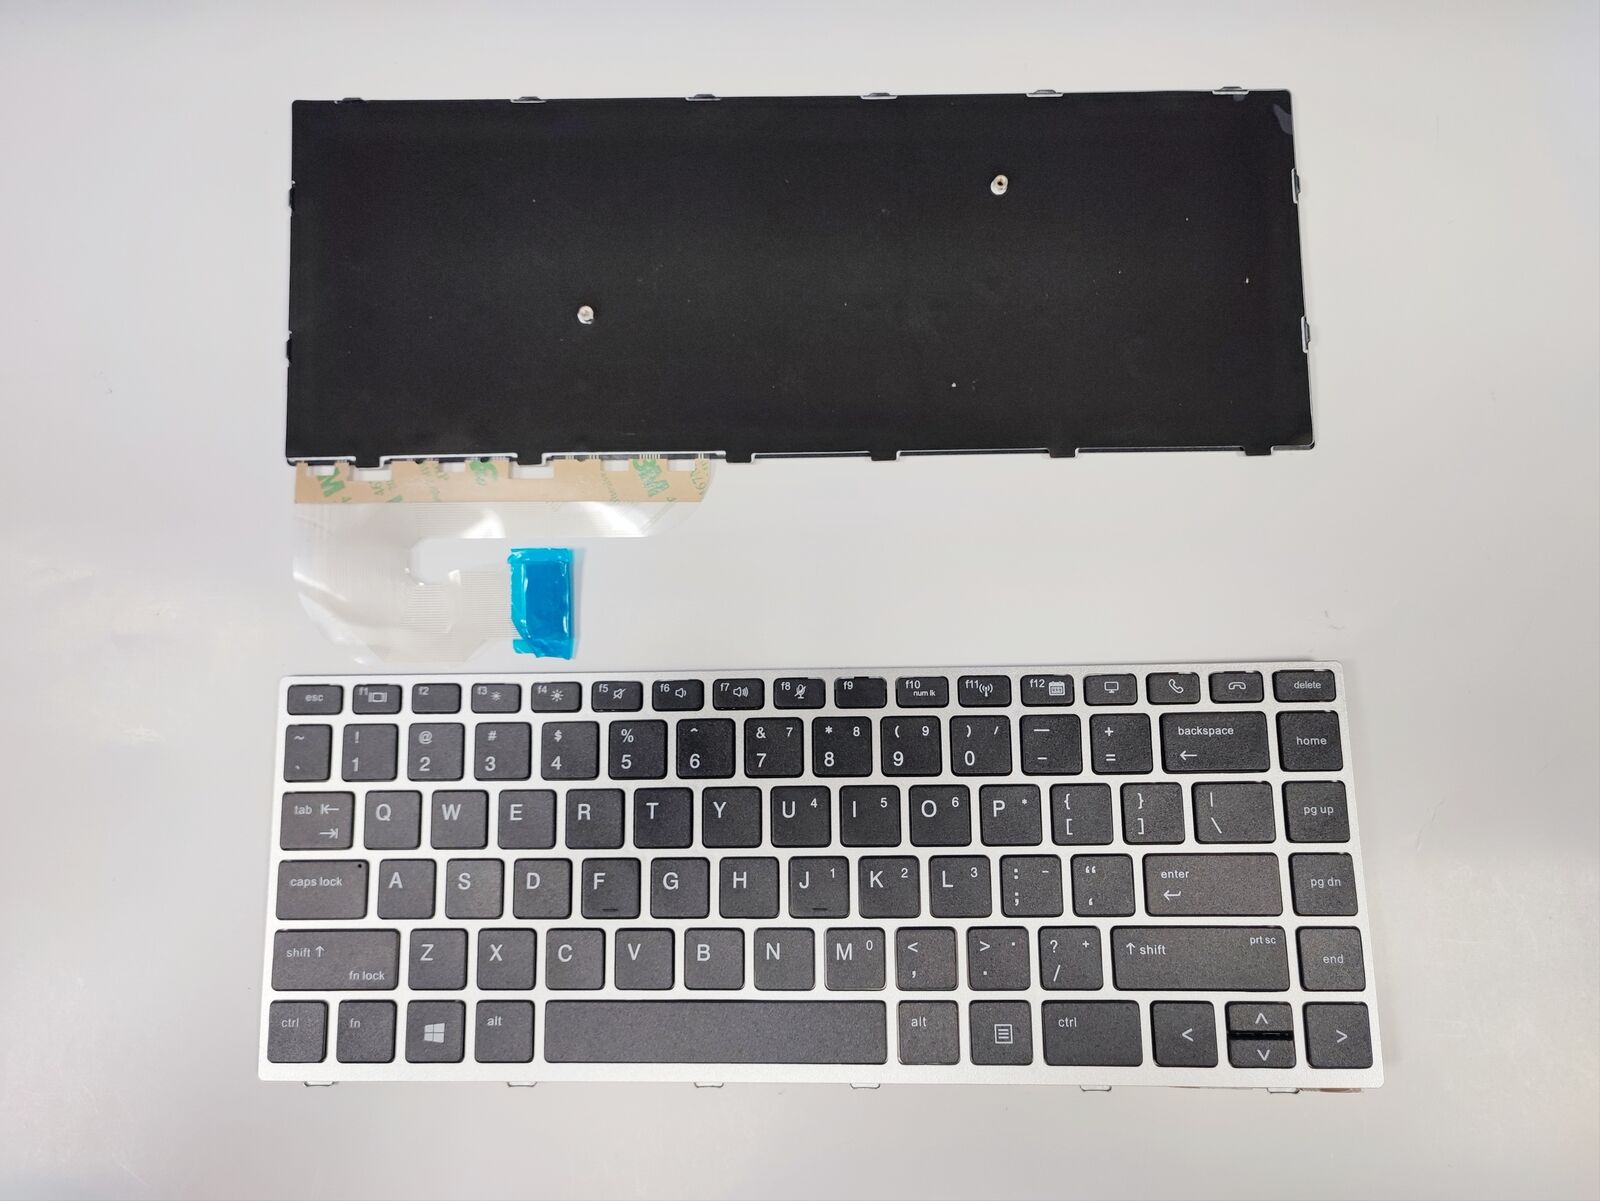 New Replacement US Keyboard No Pointer for HP EliteBook 840 G5 846 G5 745 G5